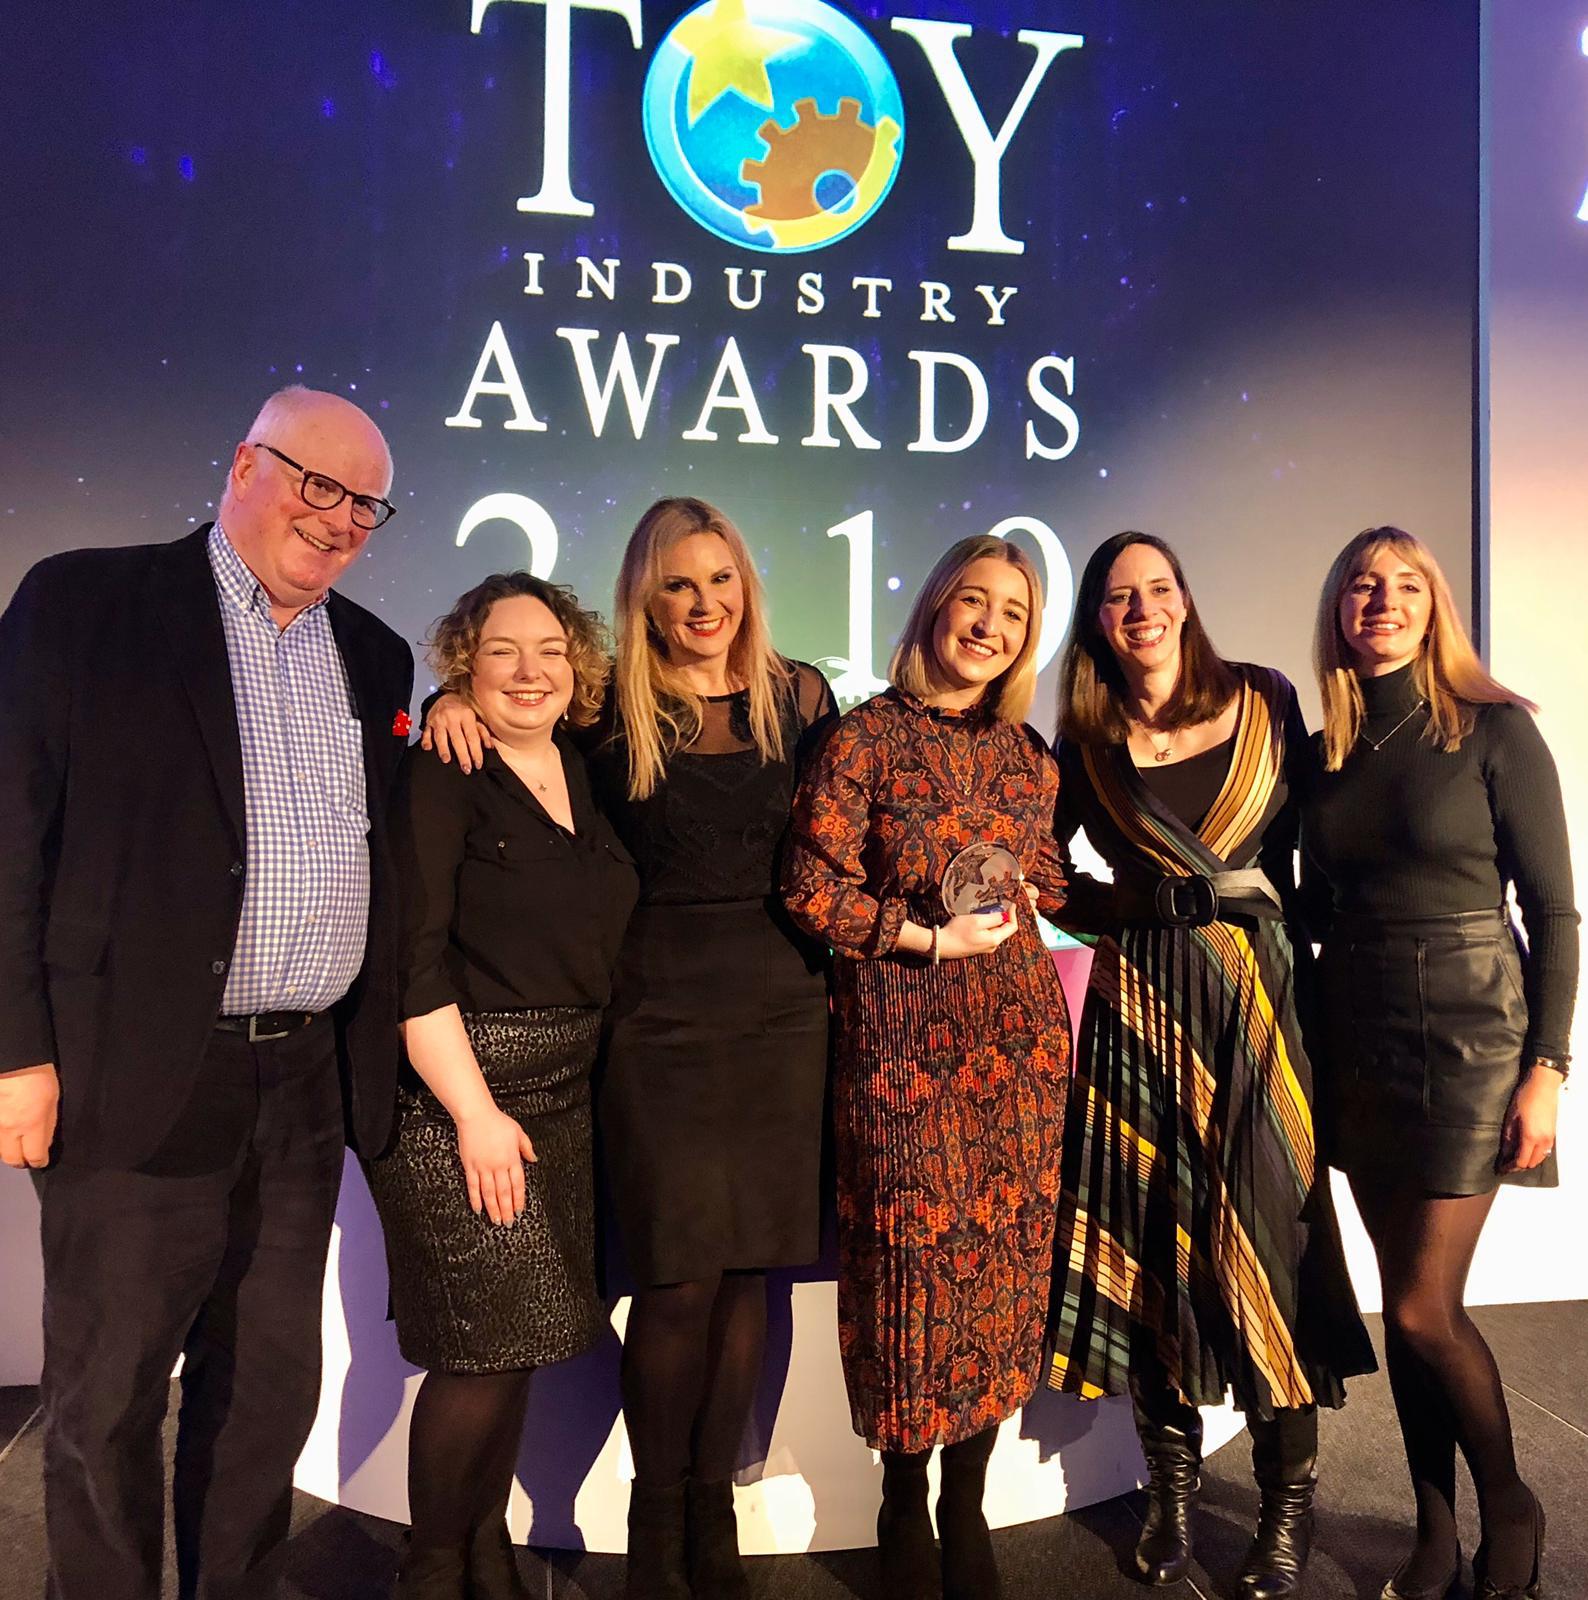 toy of the year awards 2019